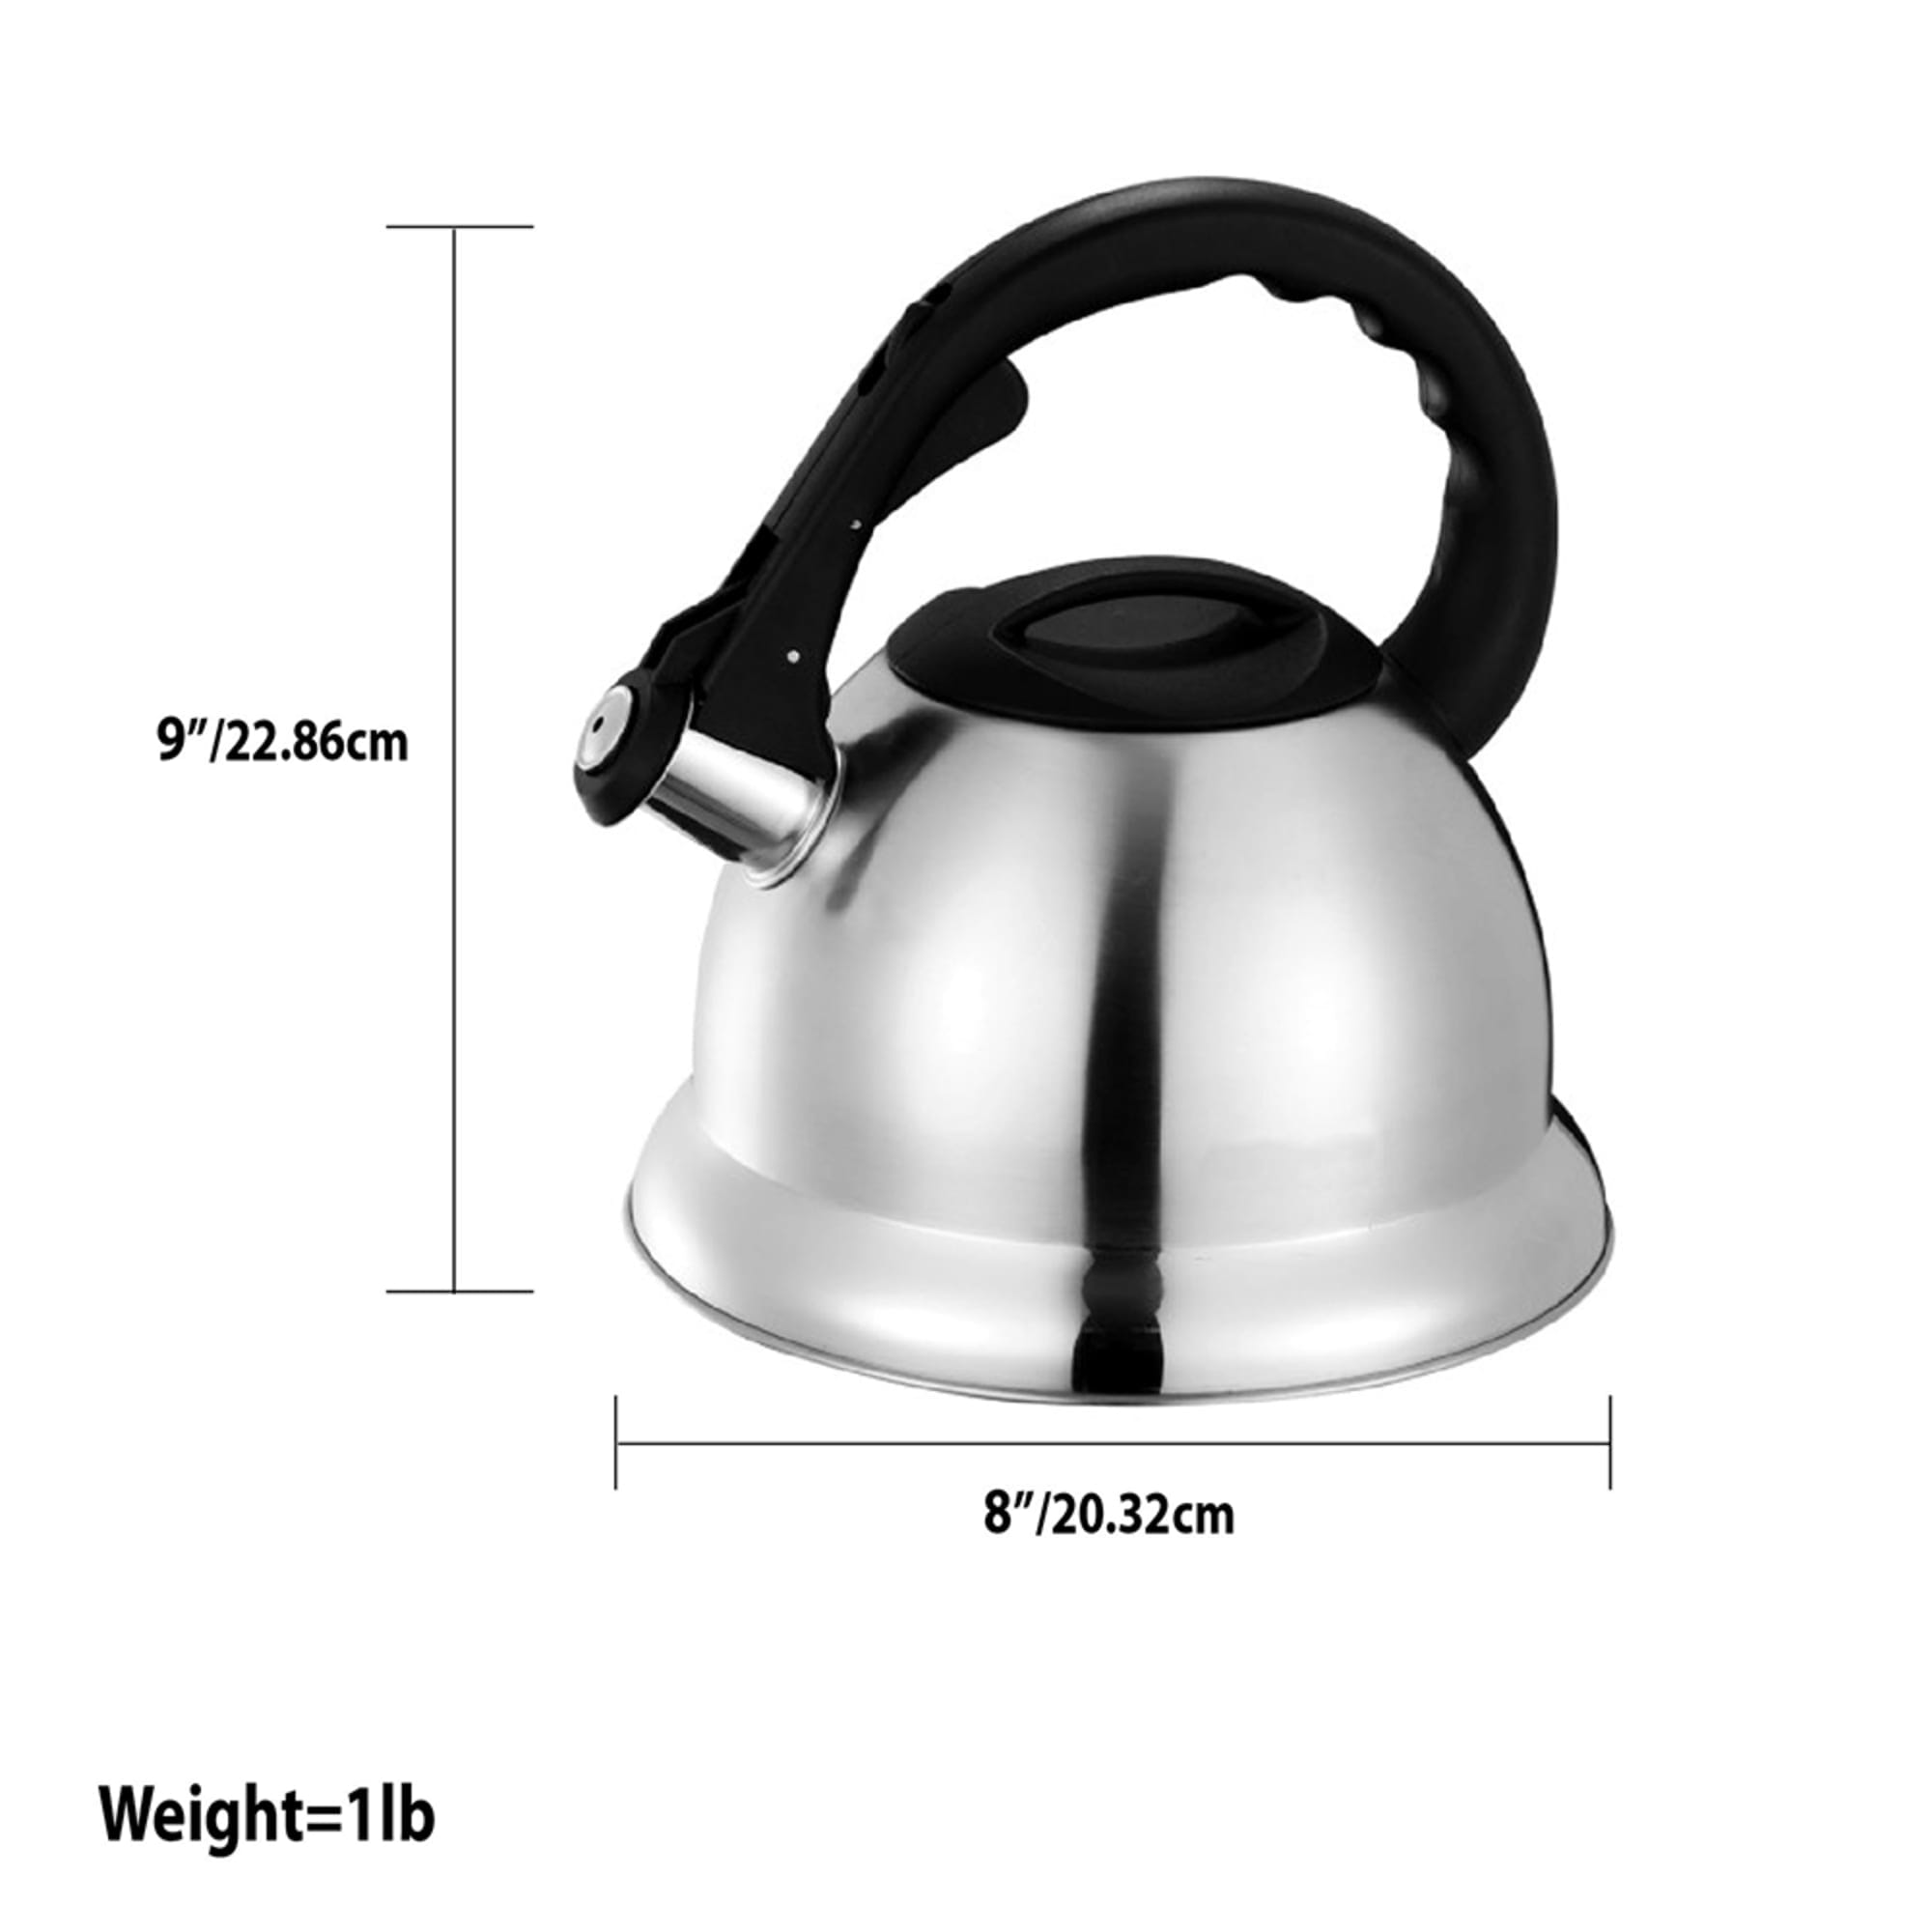 Home Basics 3.0 Liter Brushed Stainless Steel Tea Kettle with Easy Grip Textured Handle, Silver $15.00 EACH, CASE PACK OF 12